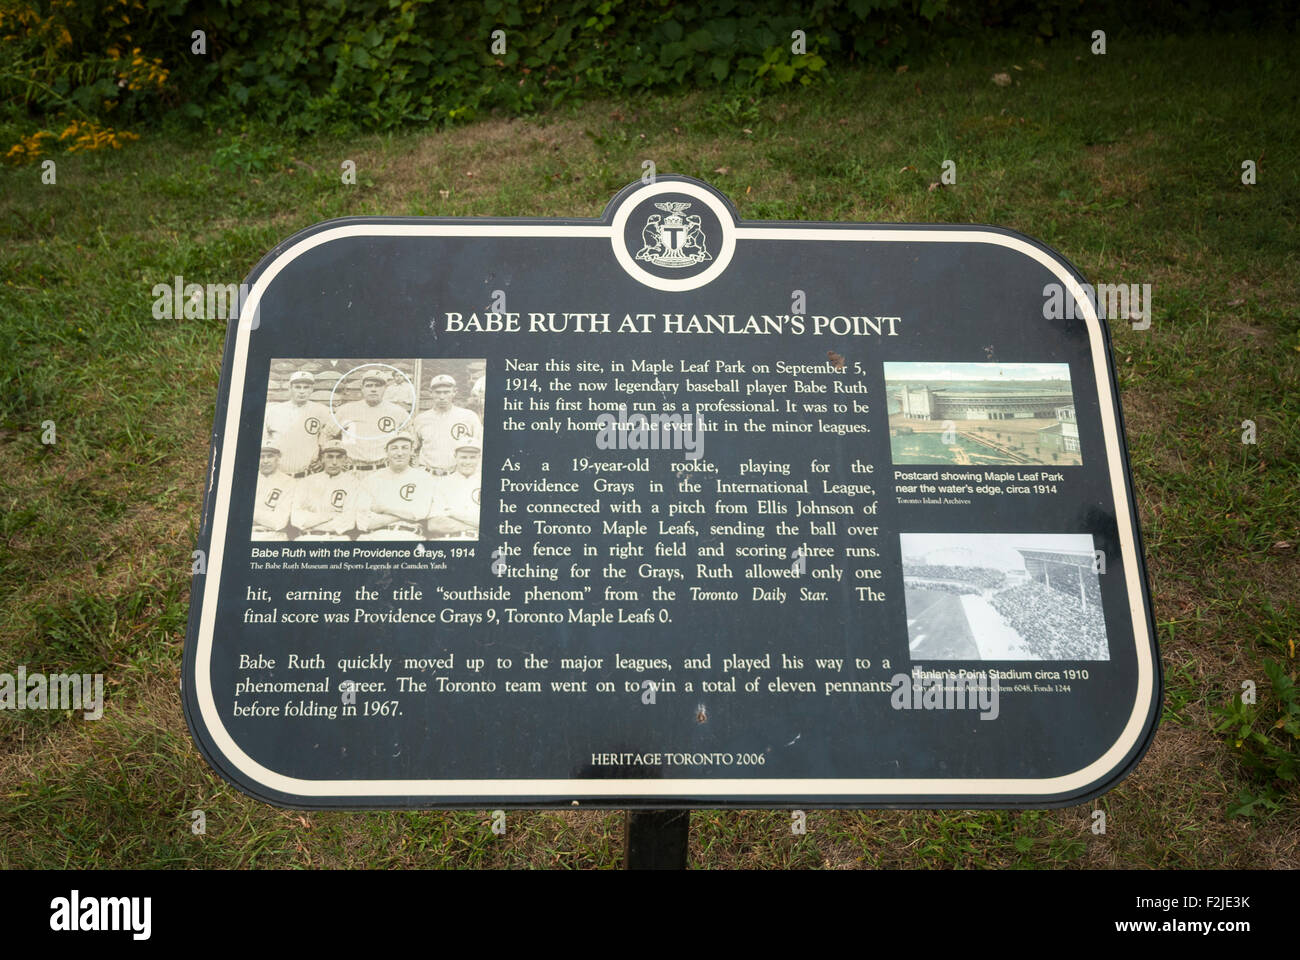 A plaque located at Hanlan's point on Toronto island the site of Babe Ruth's first home run as a professional baseball player. Stock Photo